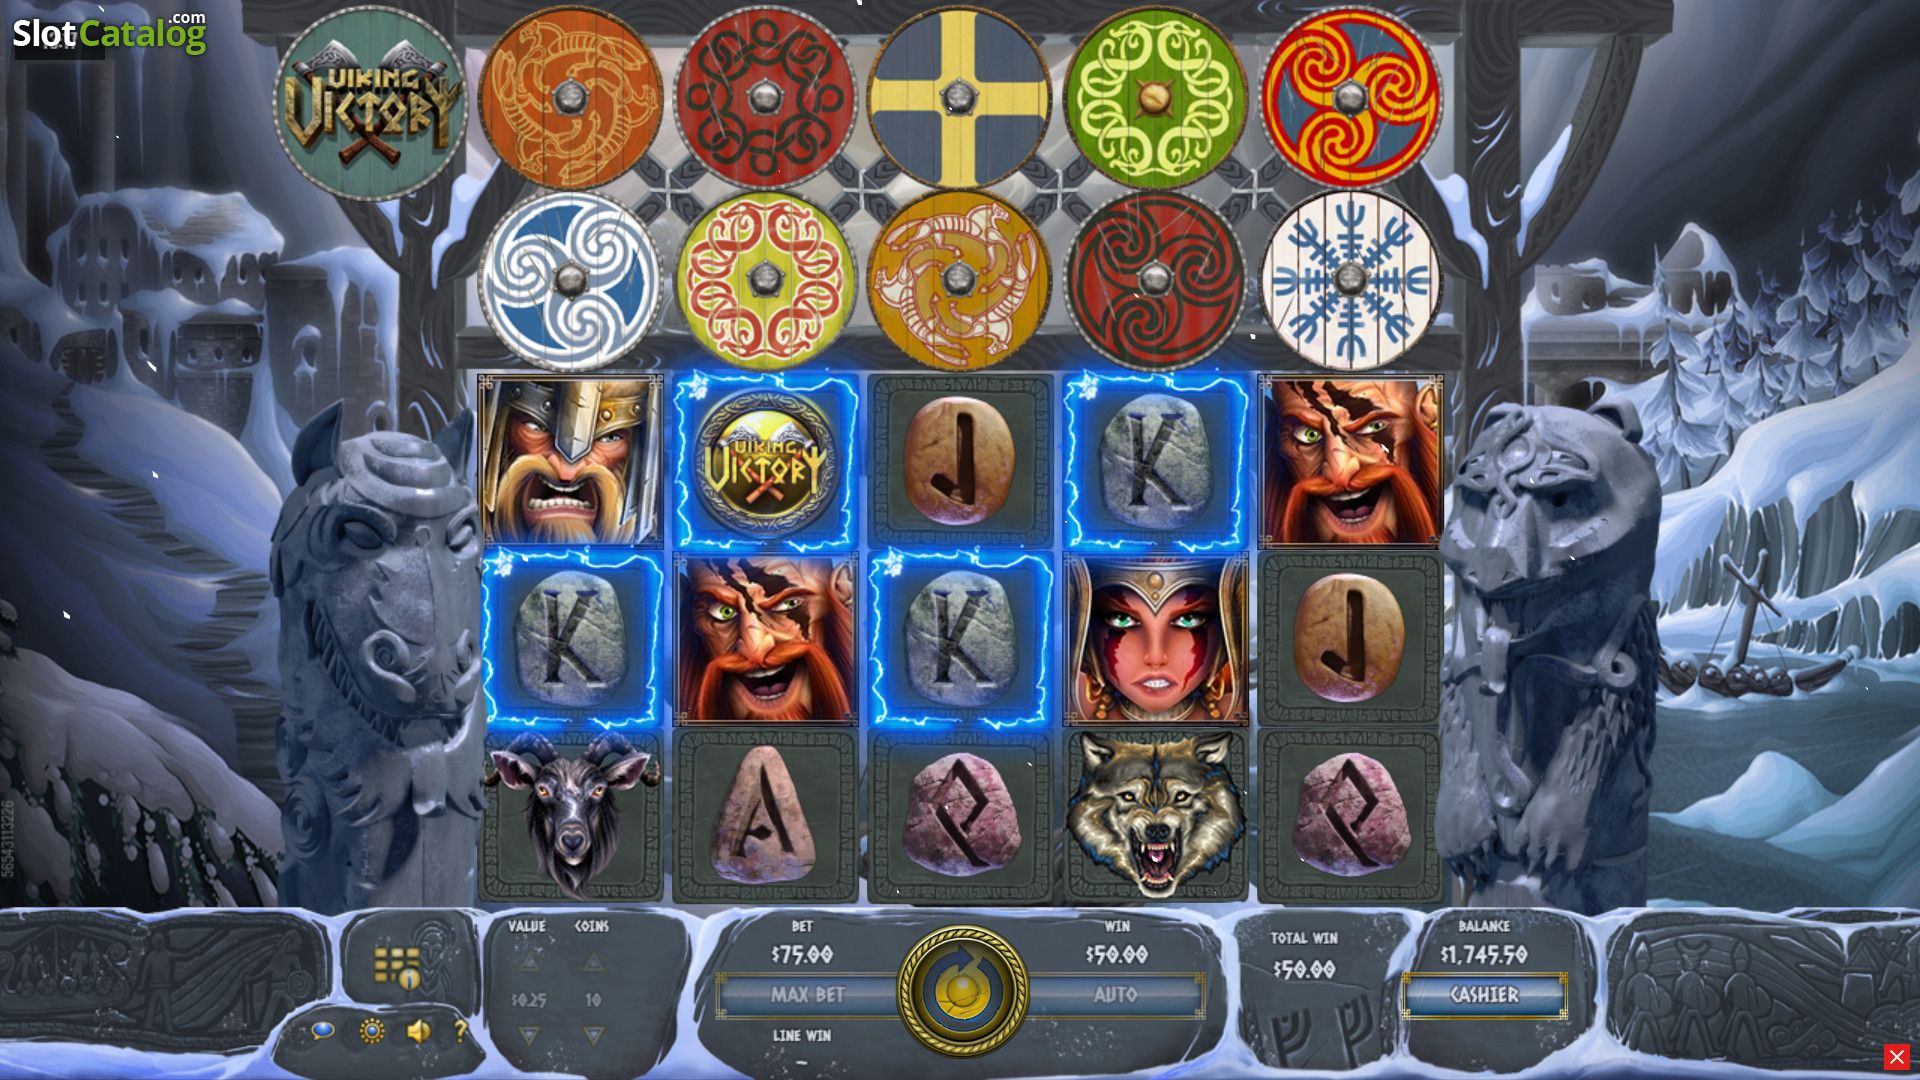 Viking Victory online slot casino game features